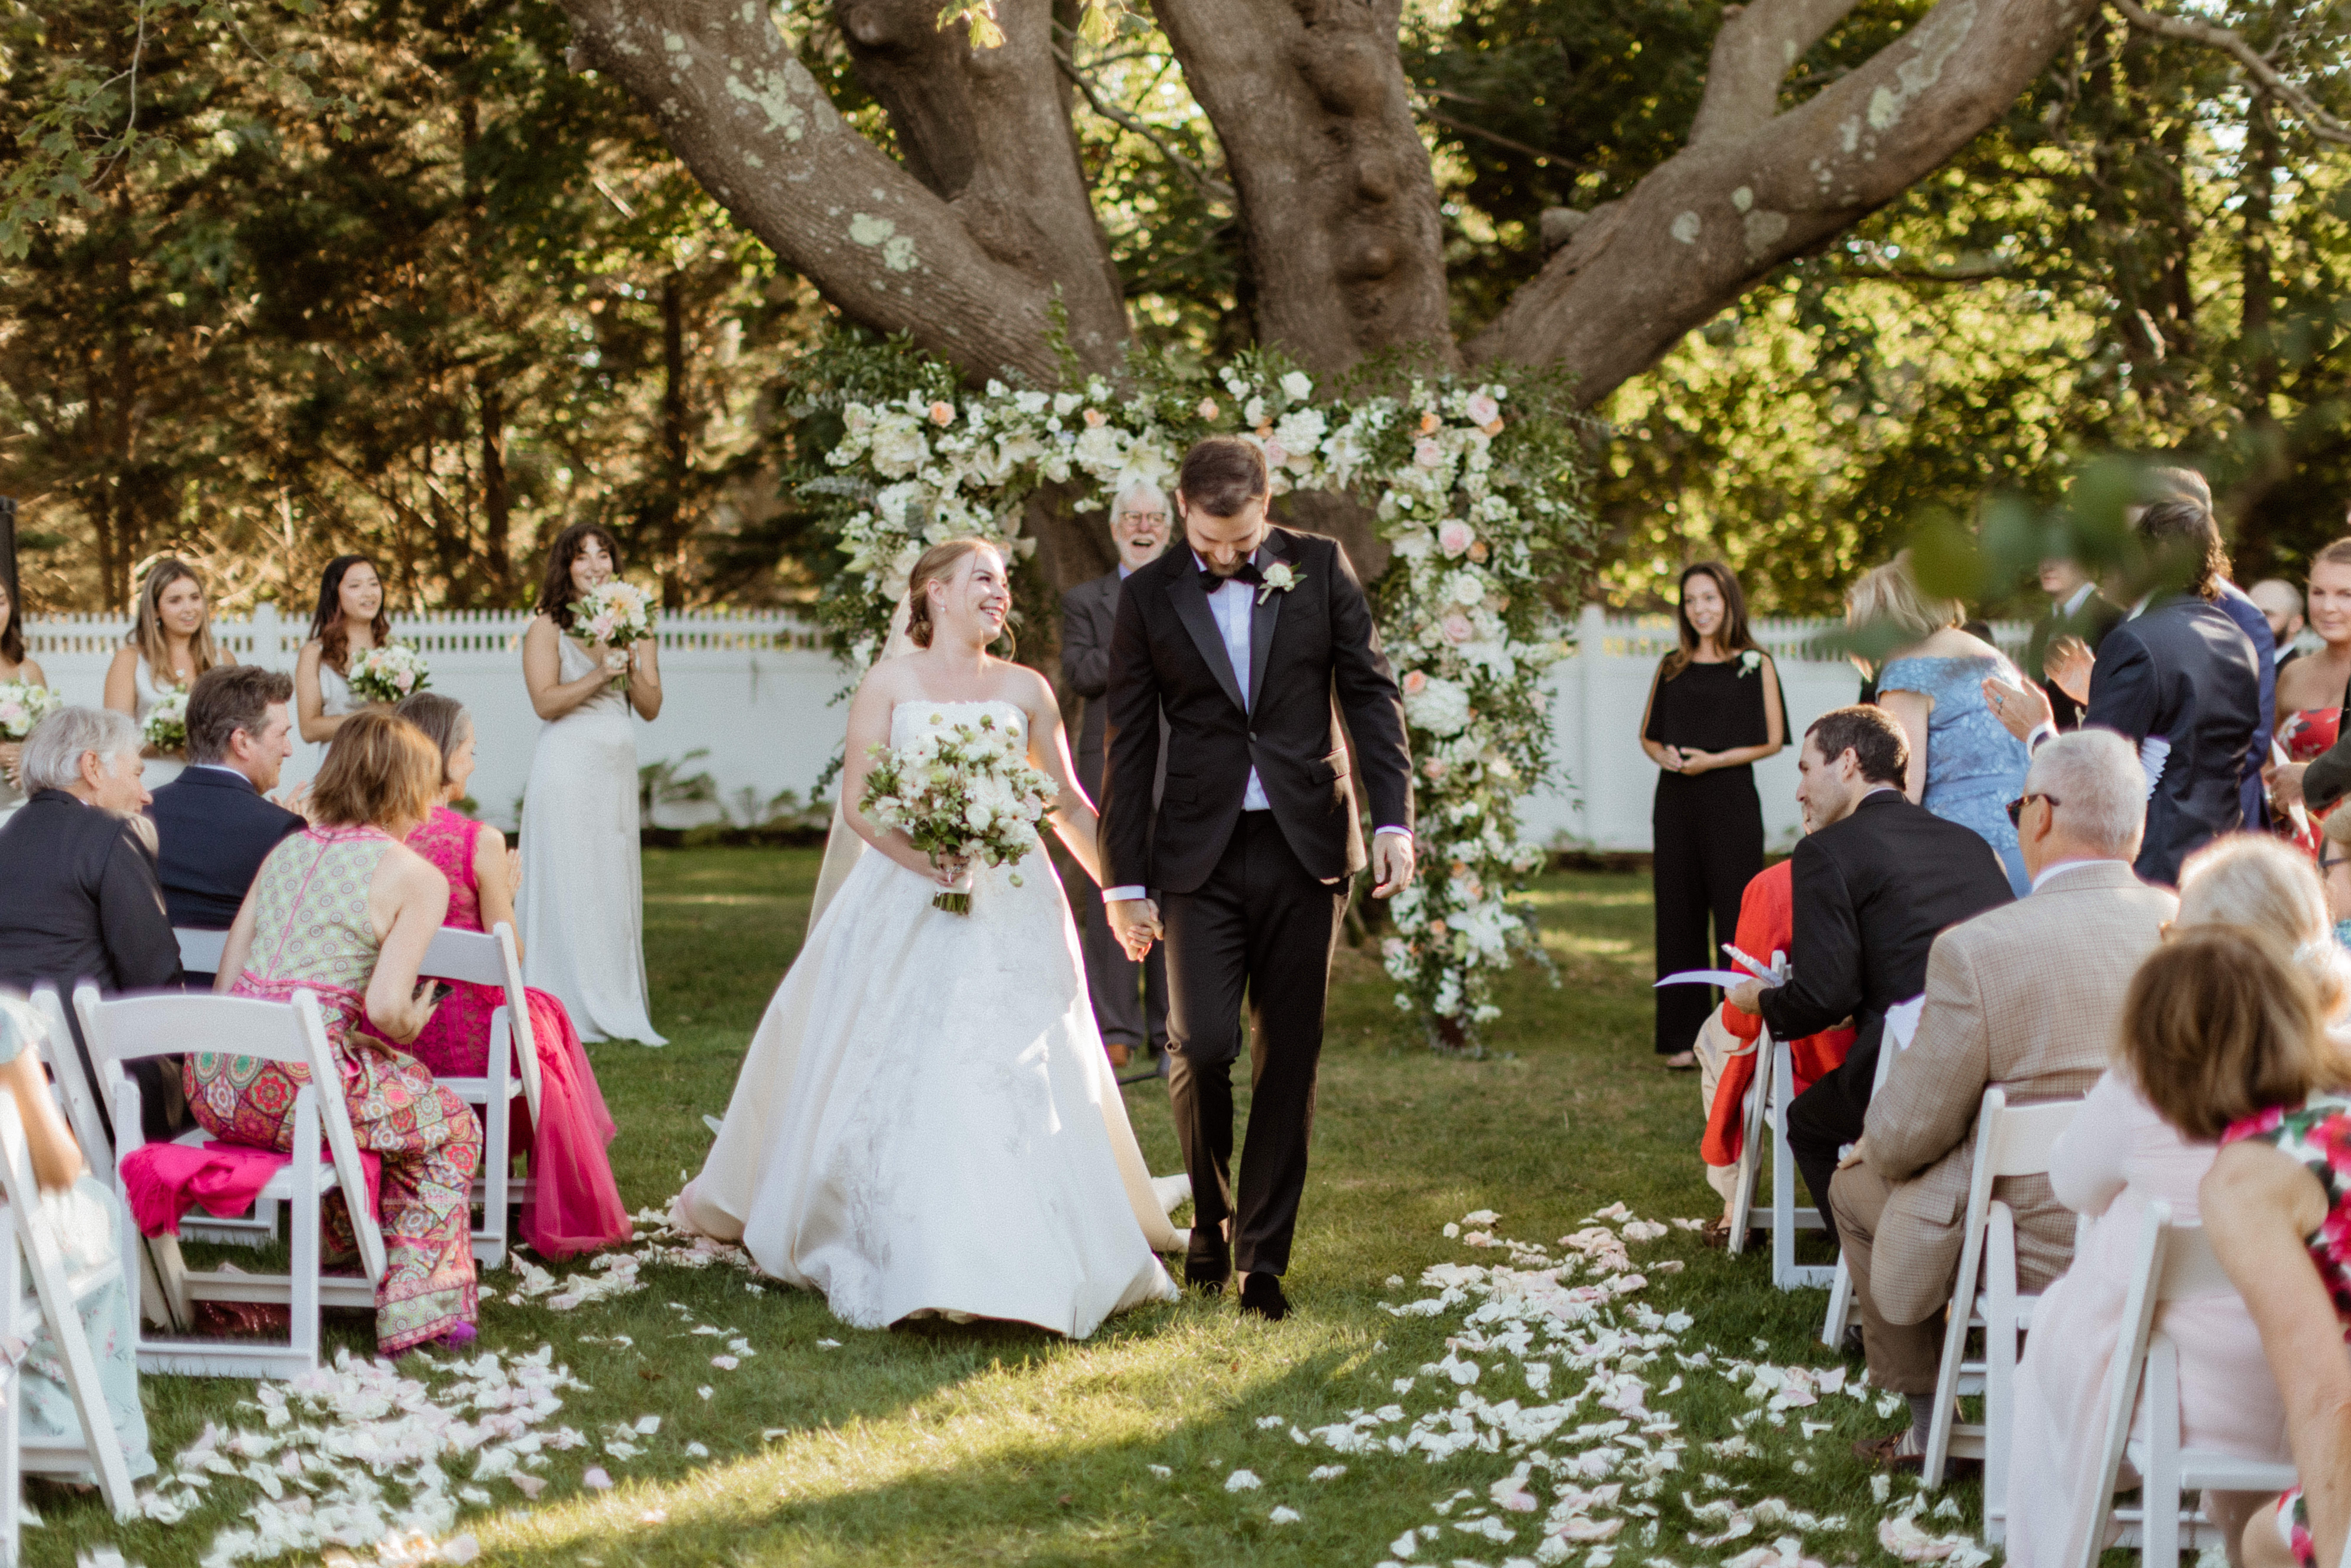 Stunning bride and groom exit their dreamy Bedell Winery, New York wedding ceremony